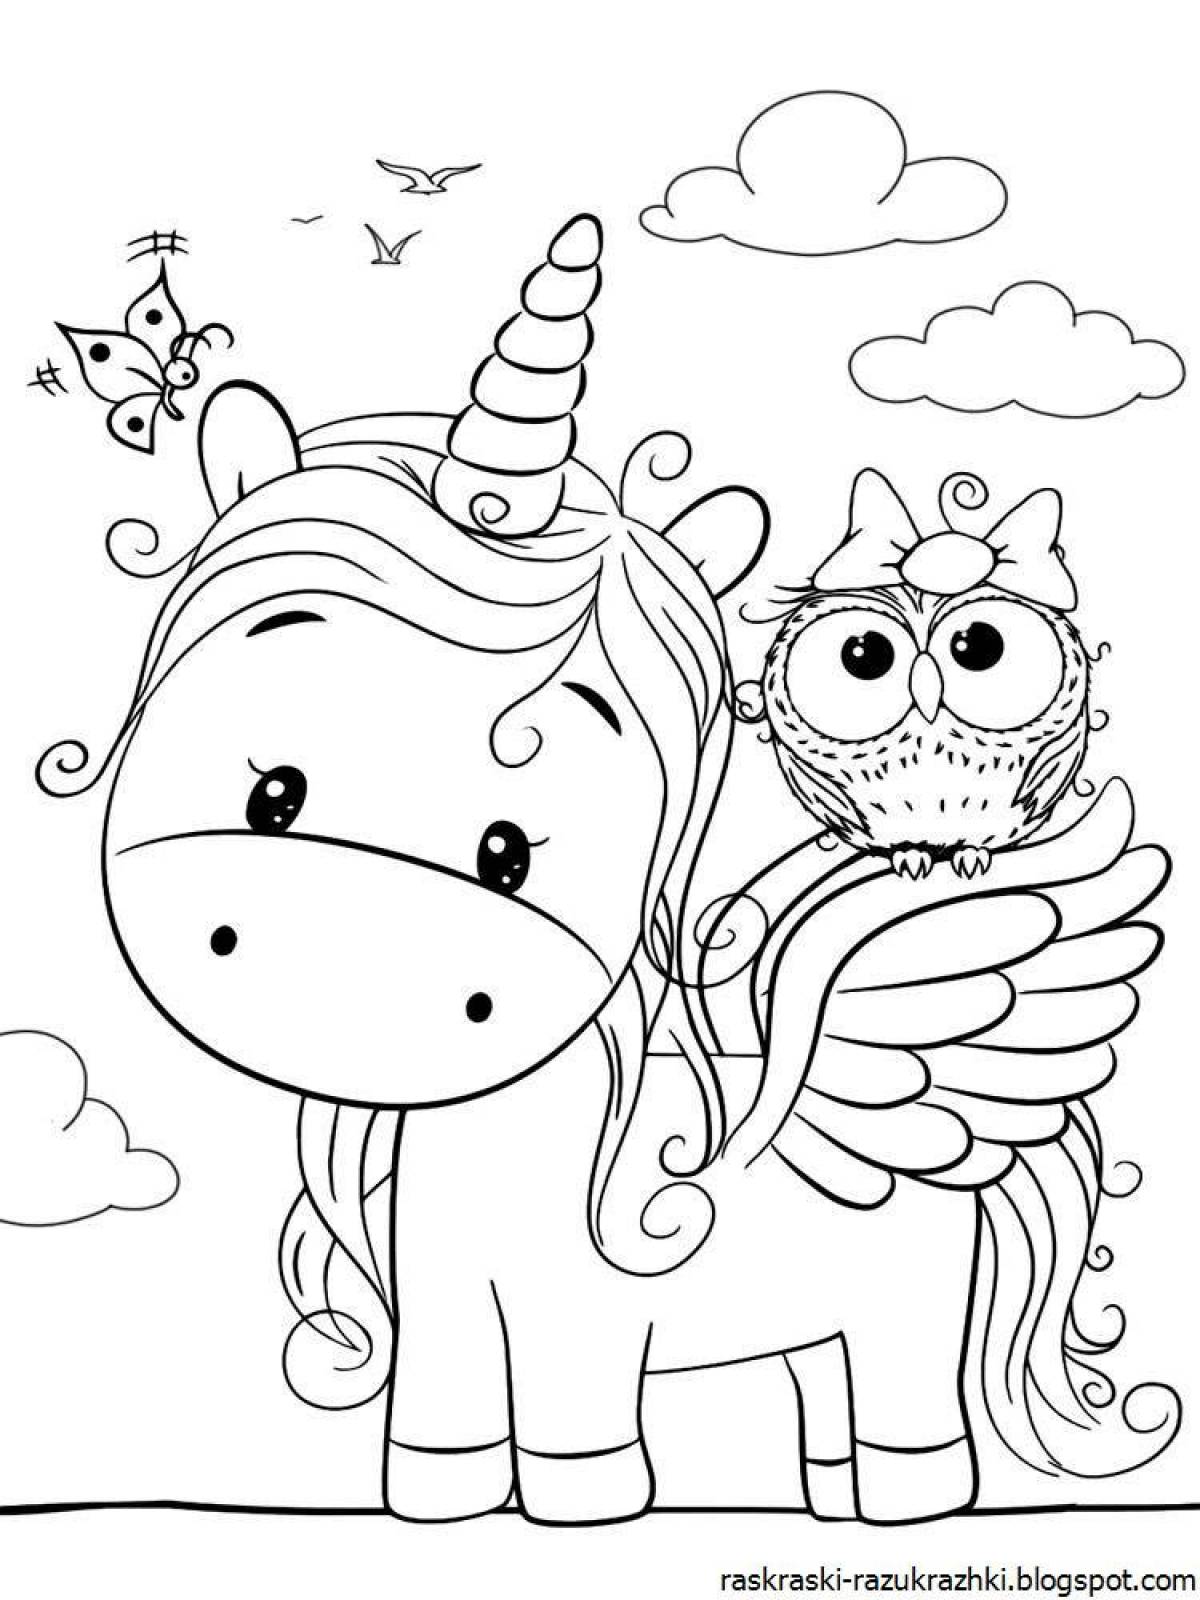 Live coloring unicorn for children 6-7 years old